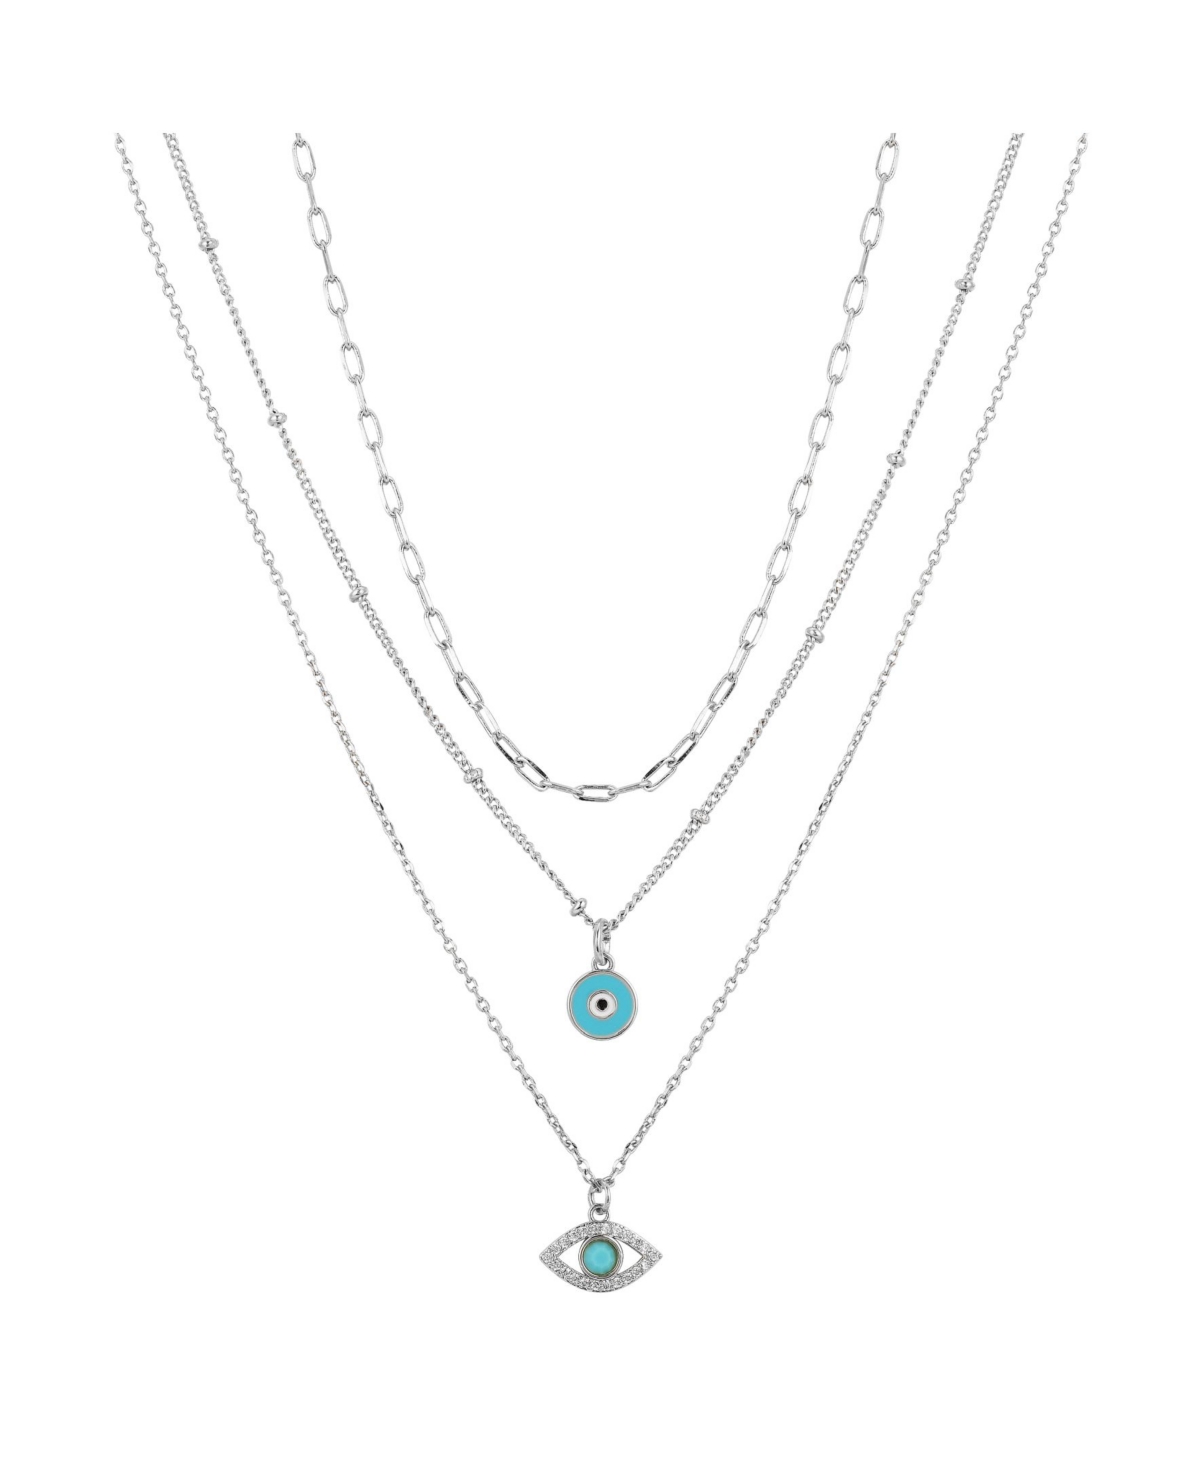 Silver Plated 3-Pieces Turquoise Crystal Evil Eye Layered Pendant Necklace Set - Gold-Plated